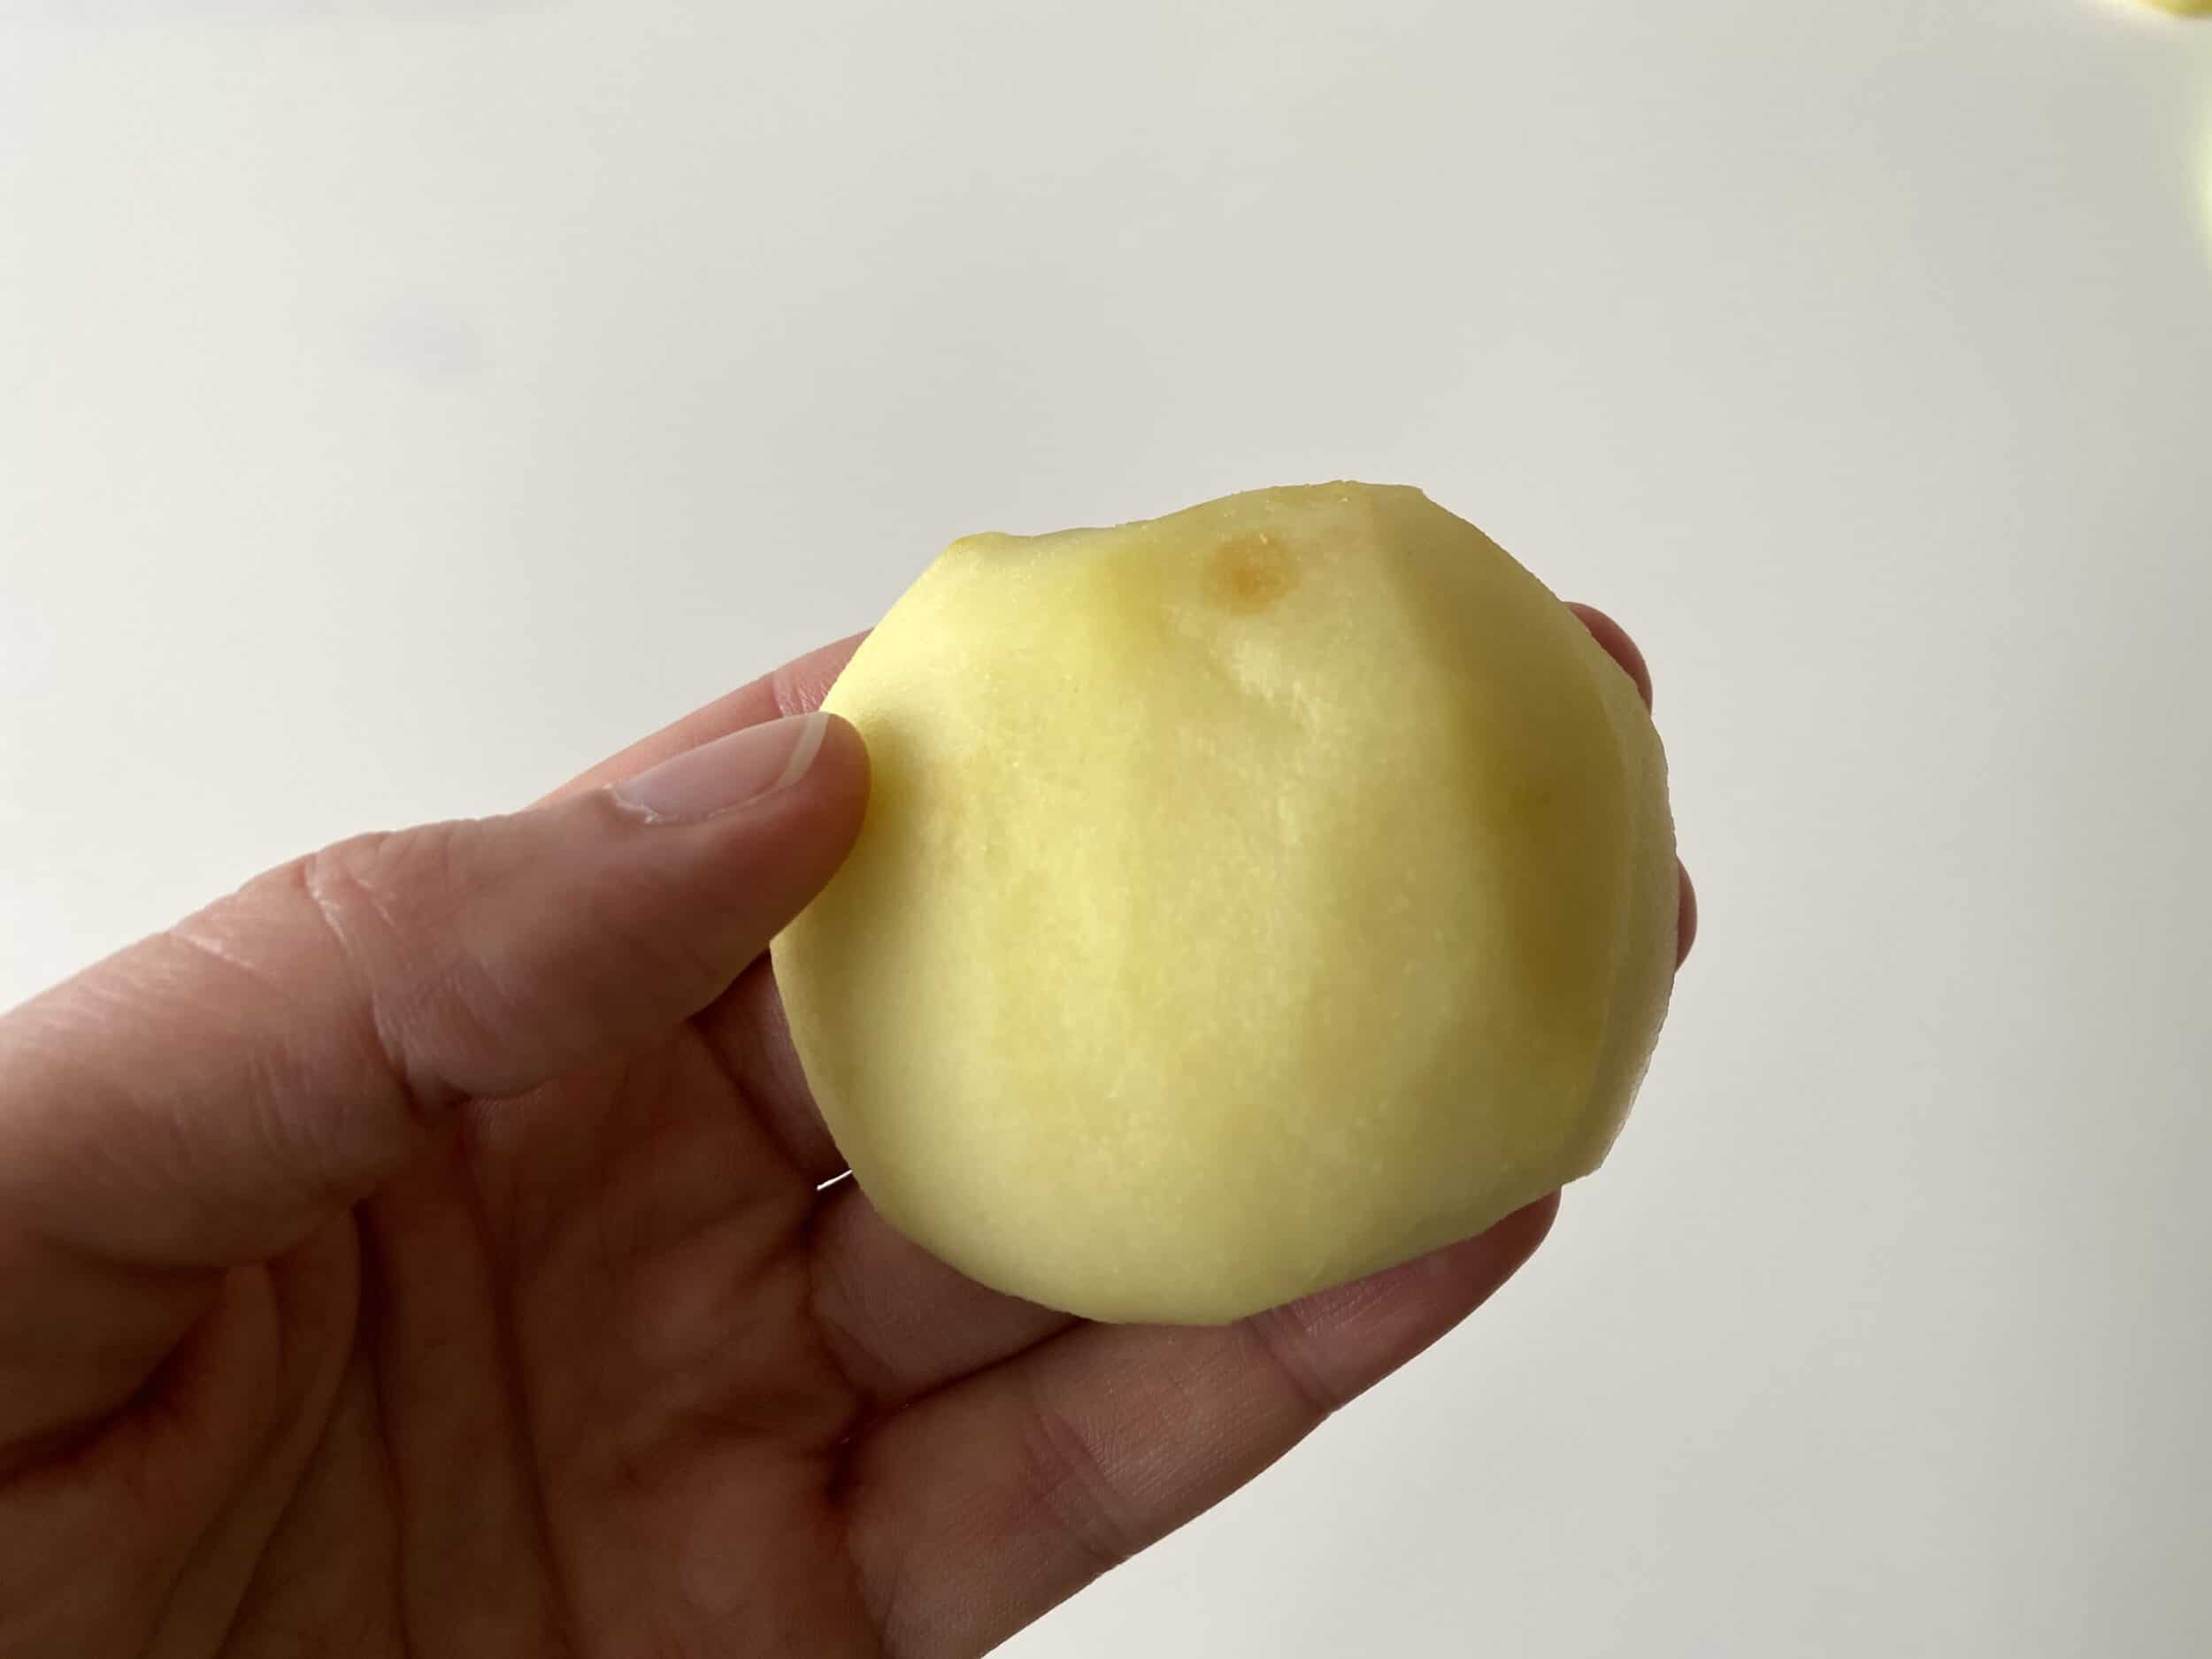 A cooked apple half held in a hand